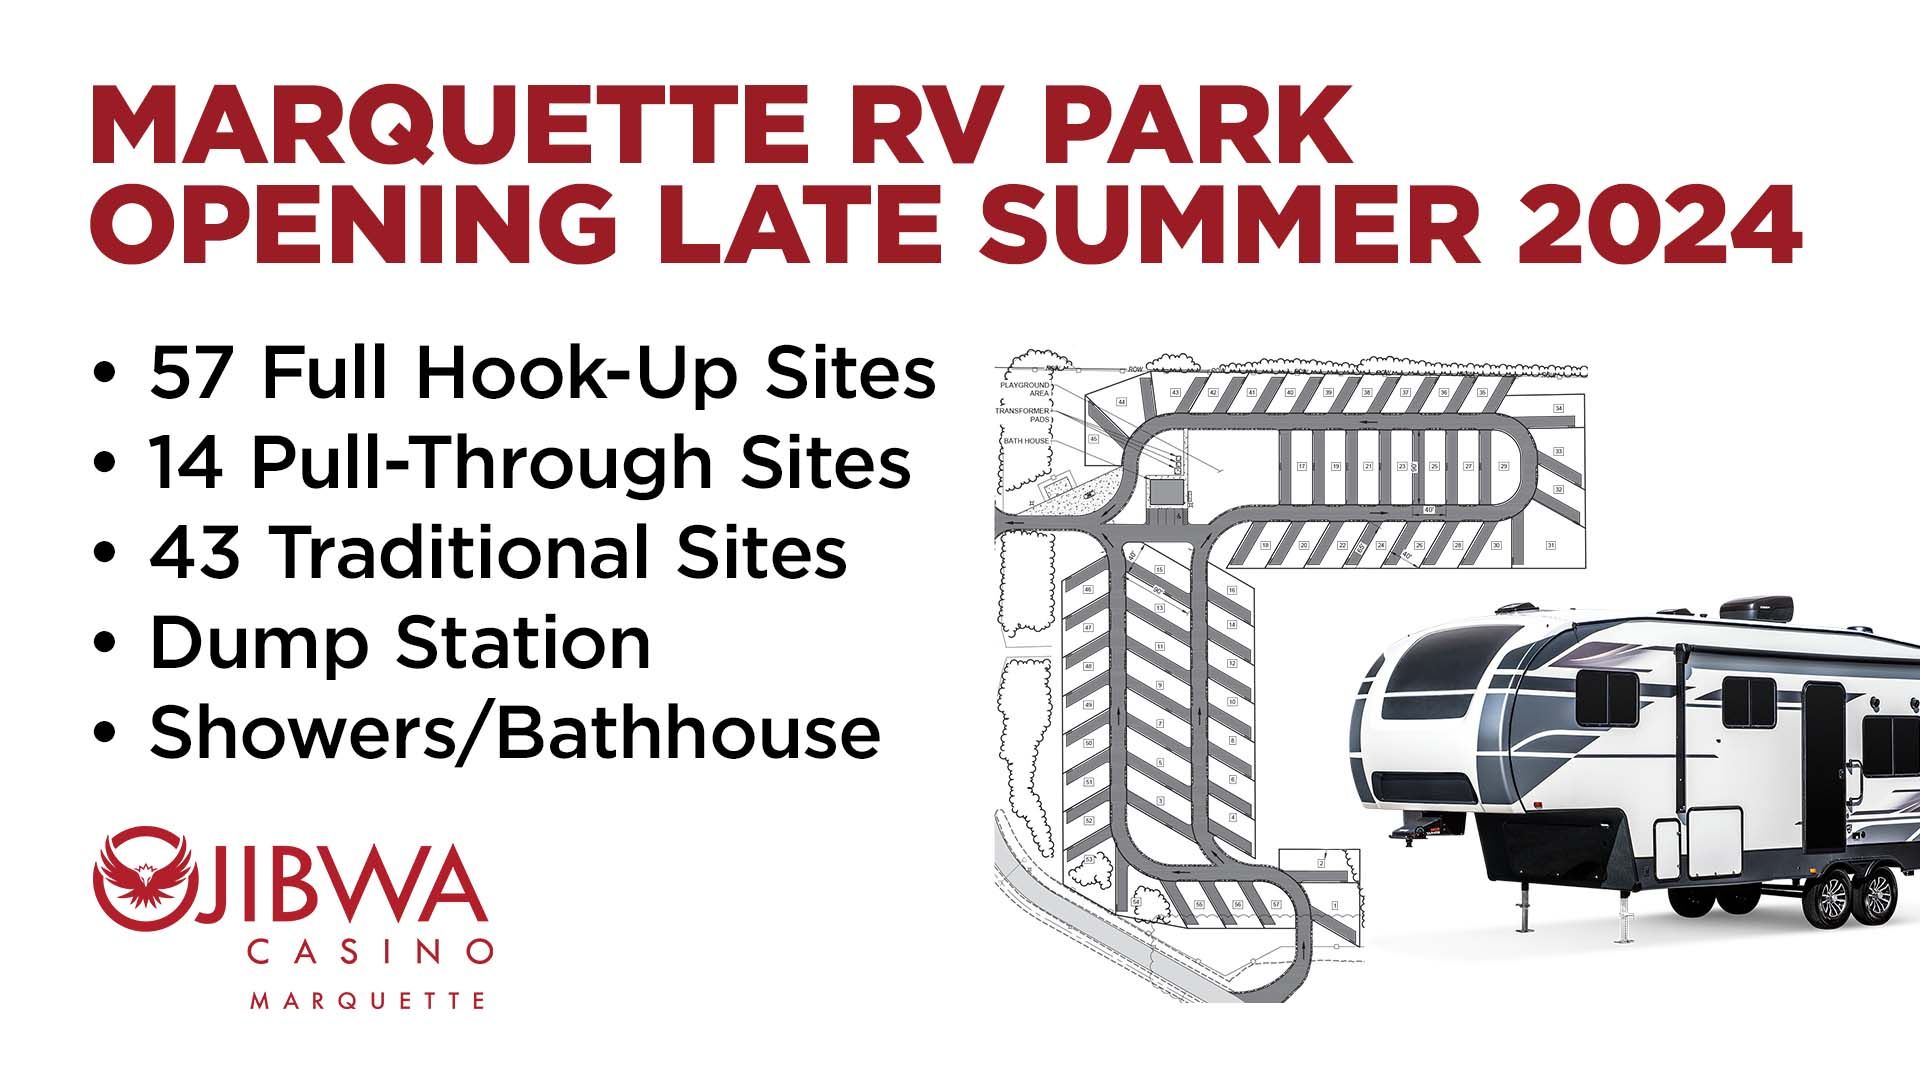 the Marquette RV park is opening late summer 2024 .